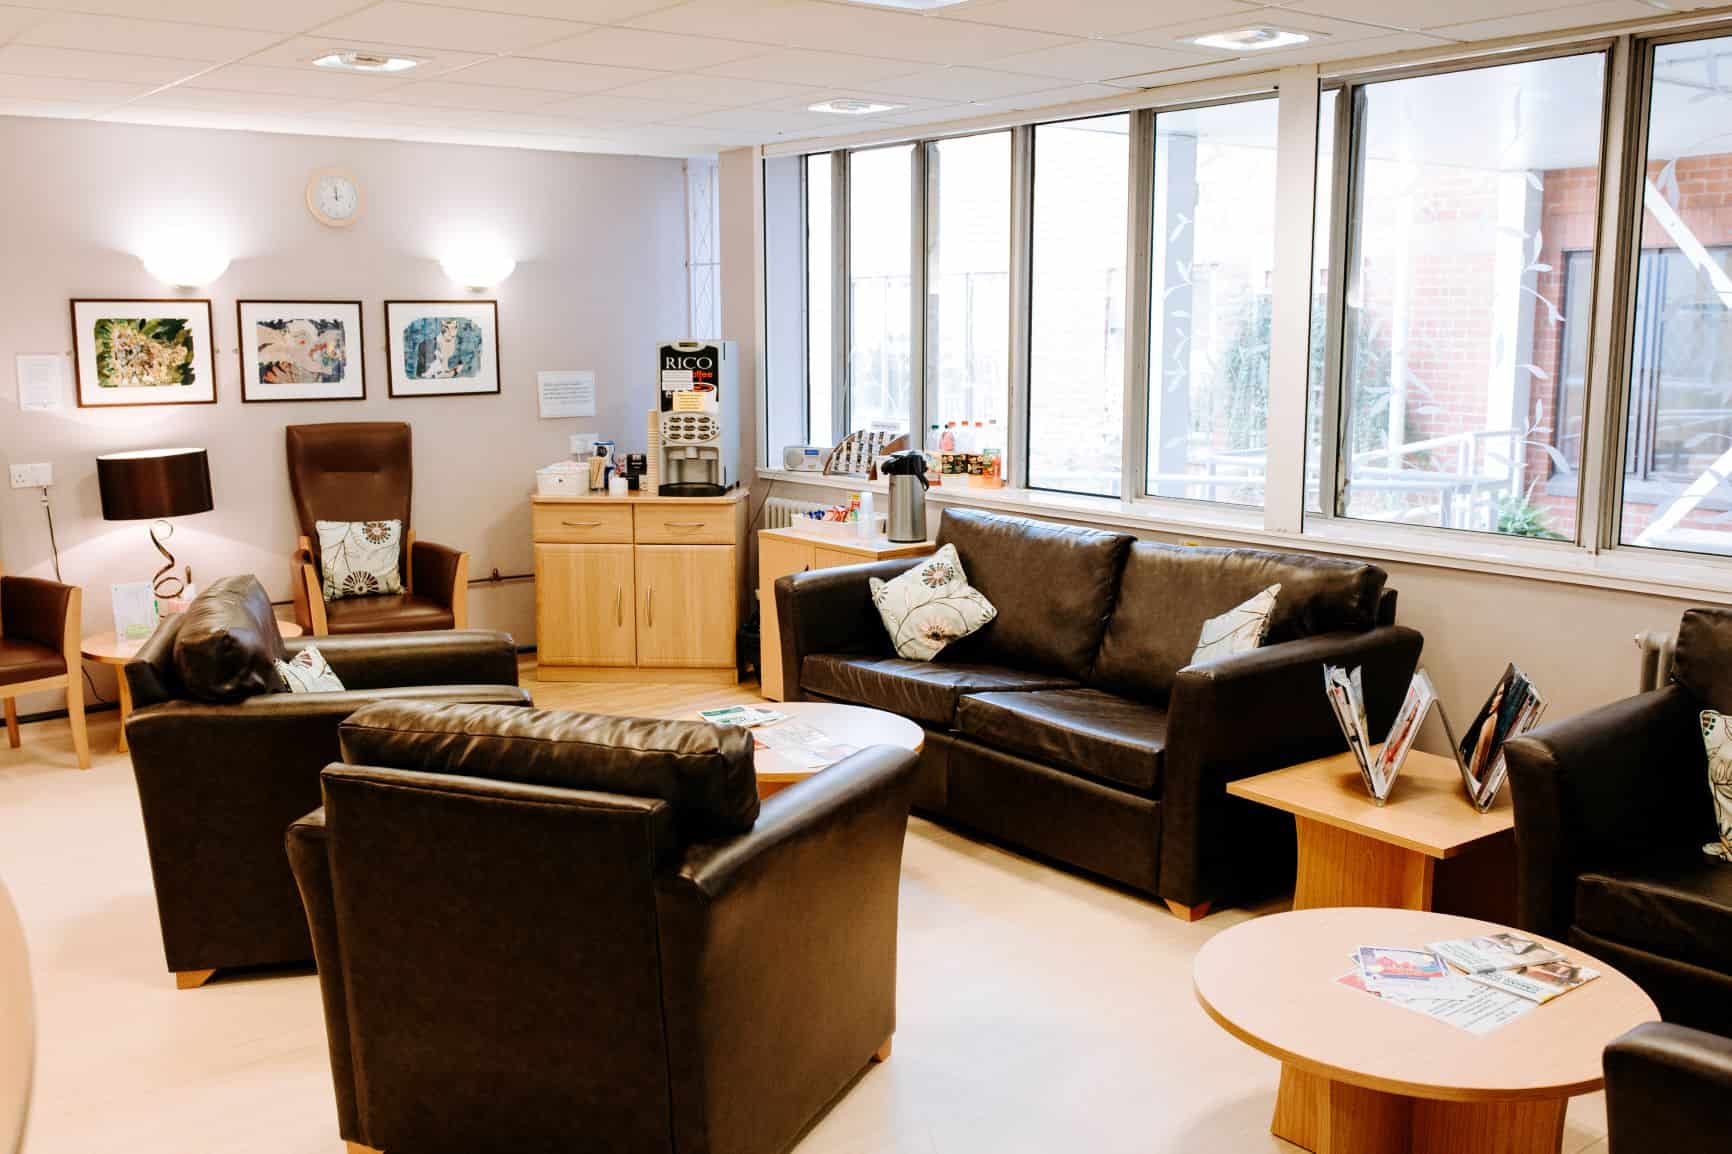 An empty room at the Cancer Care centre in York - the room is filled with sofas and side tables. There are big windows along the right hand side of the room.